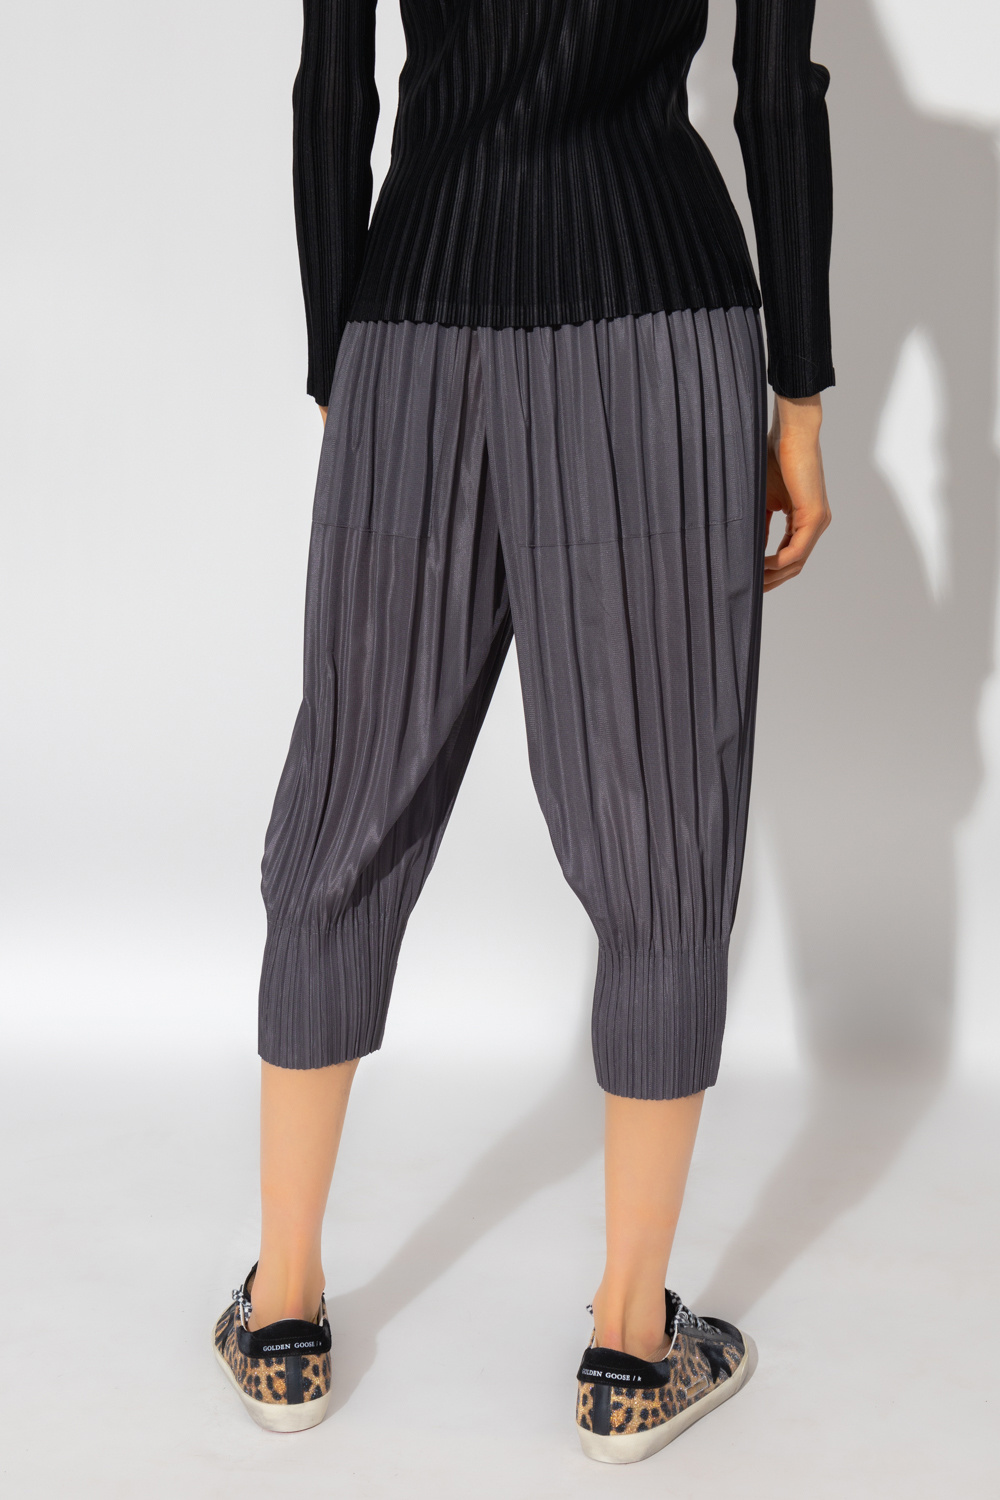 Gelso Pleated Trousers  Light Taupe Melange  The Frankie Shop